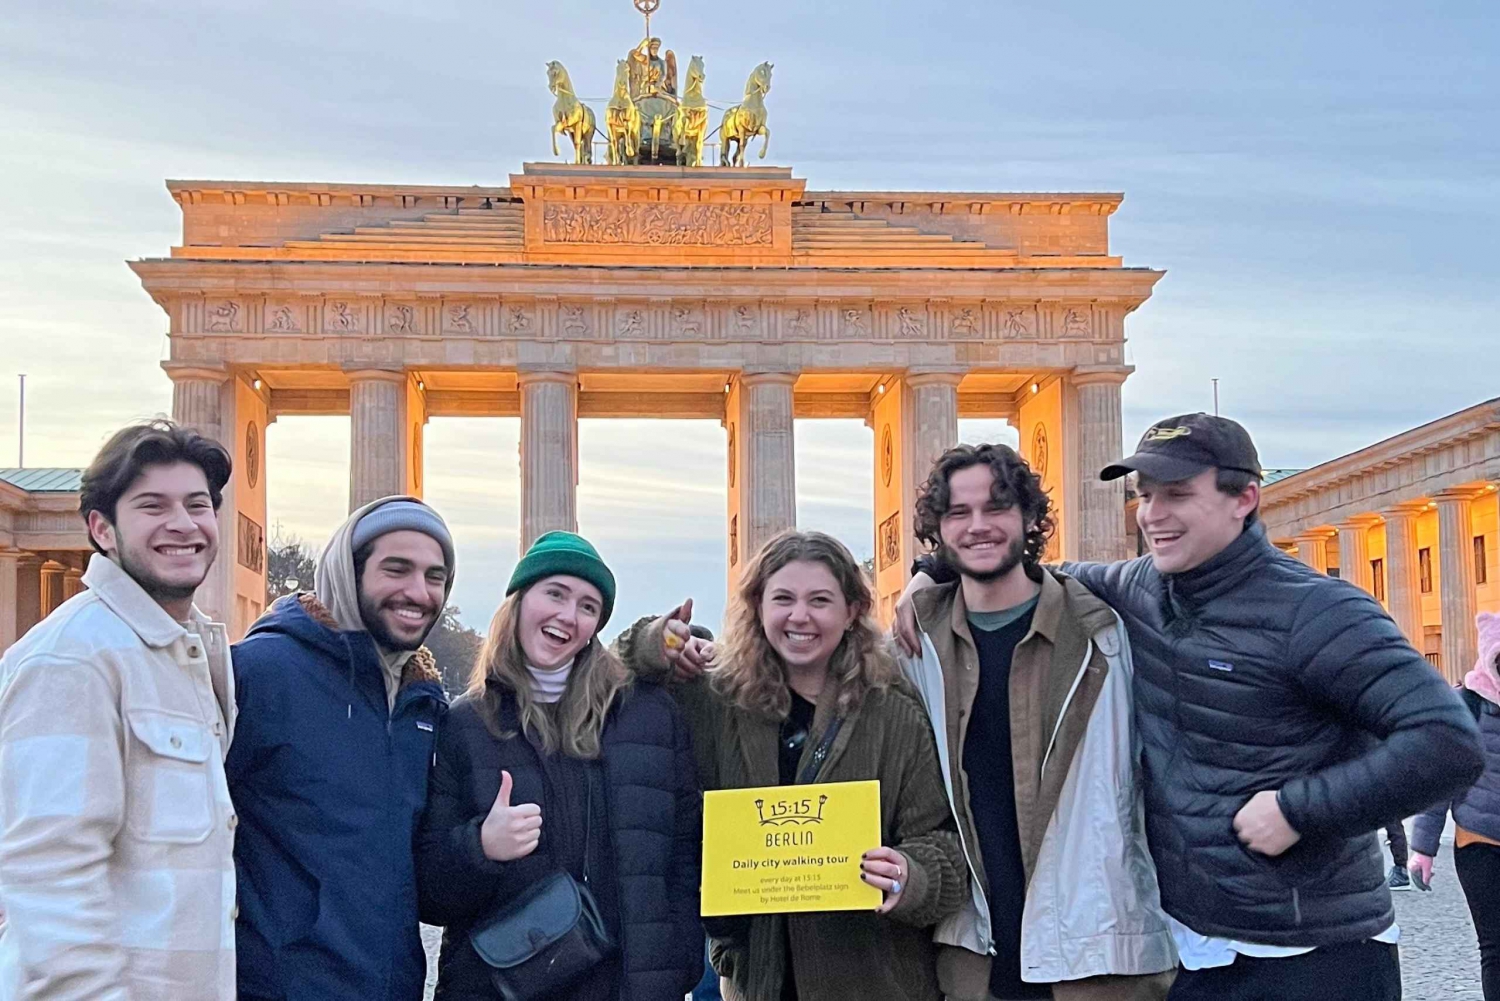 Berlin at 15:15 | Guided City Walking Tour with Small Group